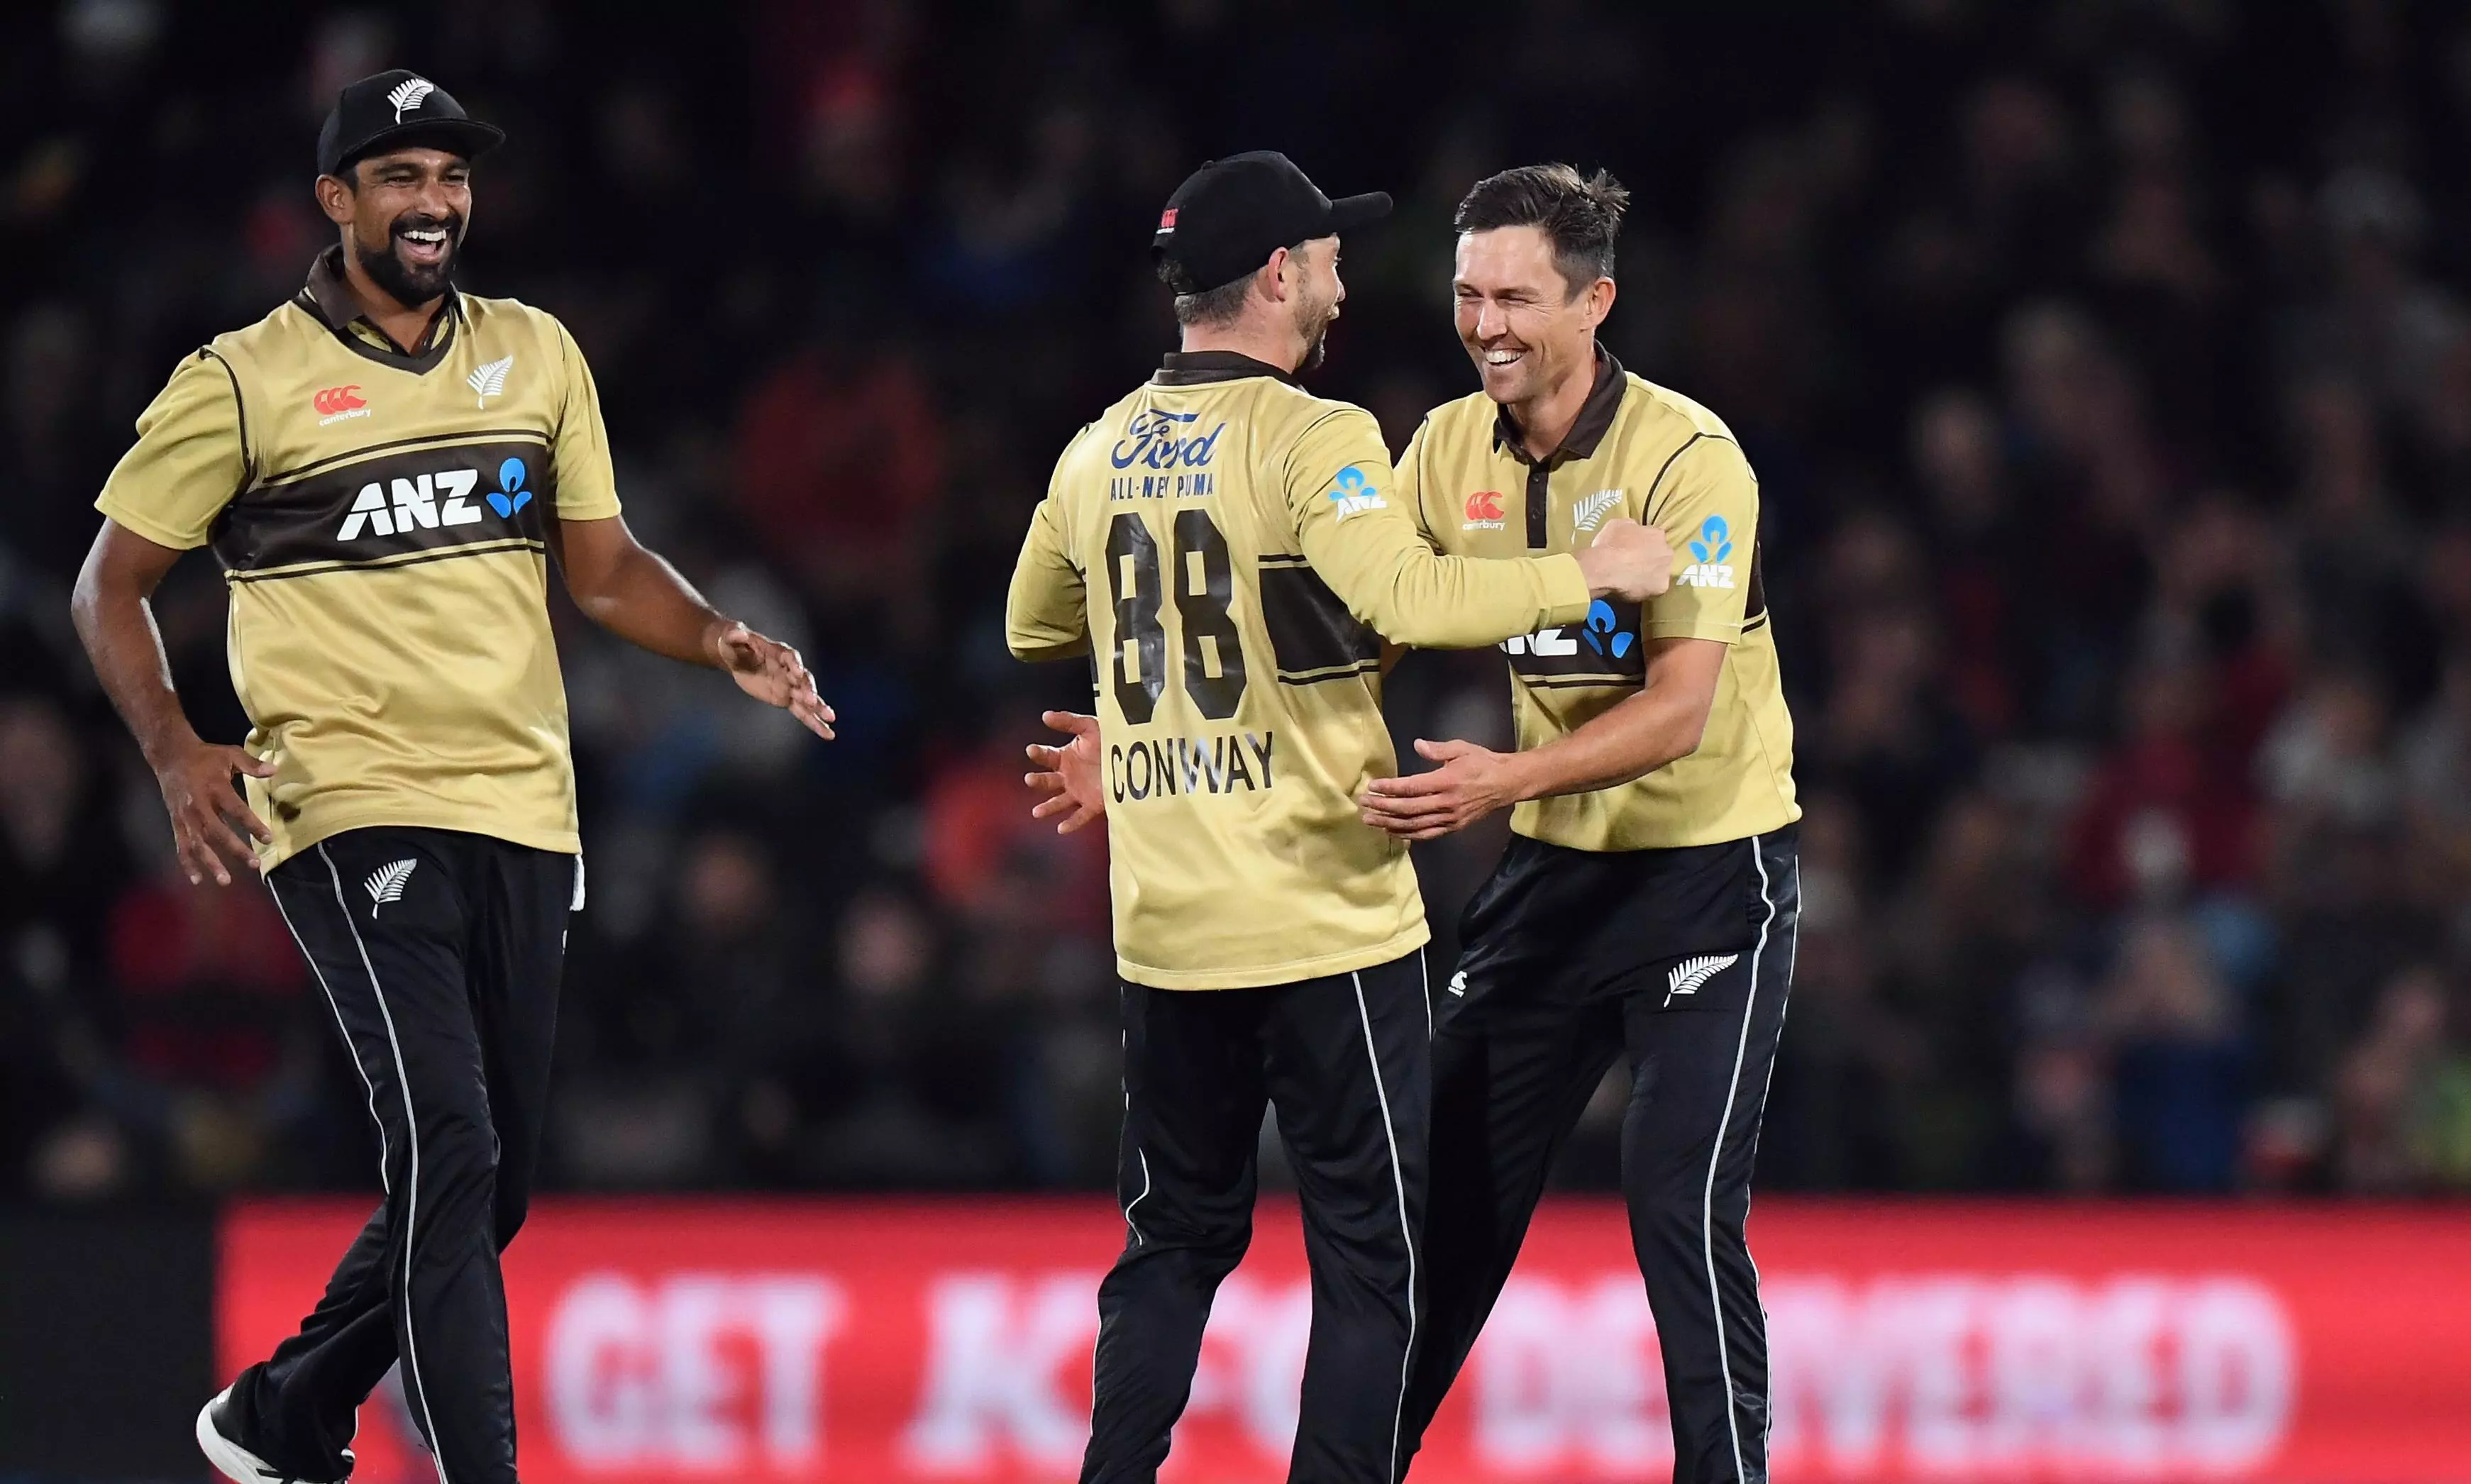 T-20: Australia lost to New Zealand by 53 runs